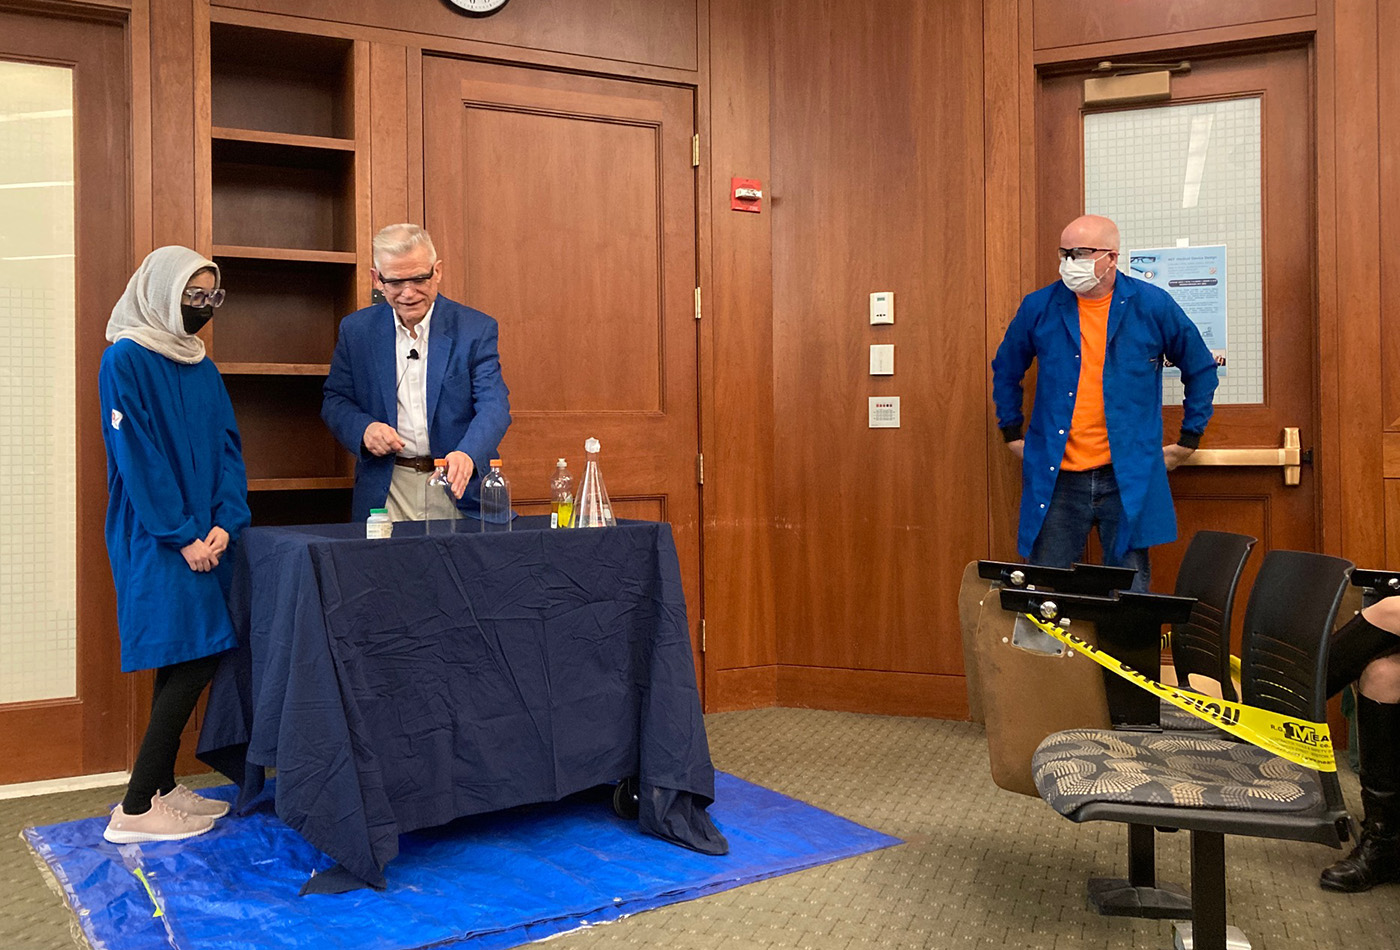 A young woman in a hijab, a white haired man, and a bald man in an orange shirt stand in a room, wearing lab coats.